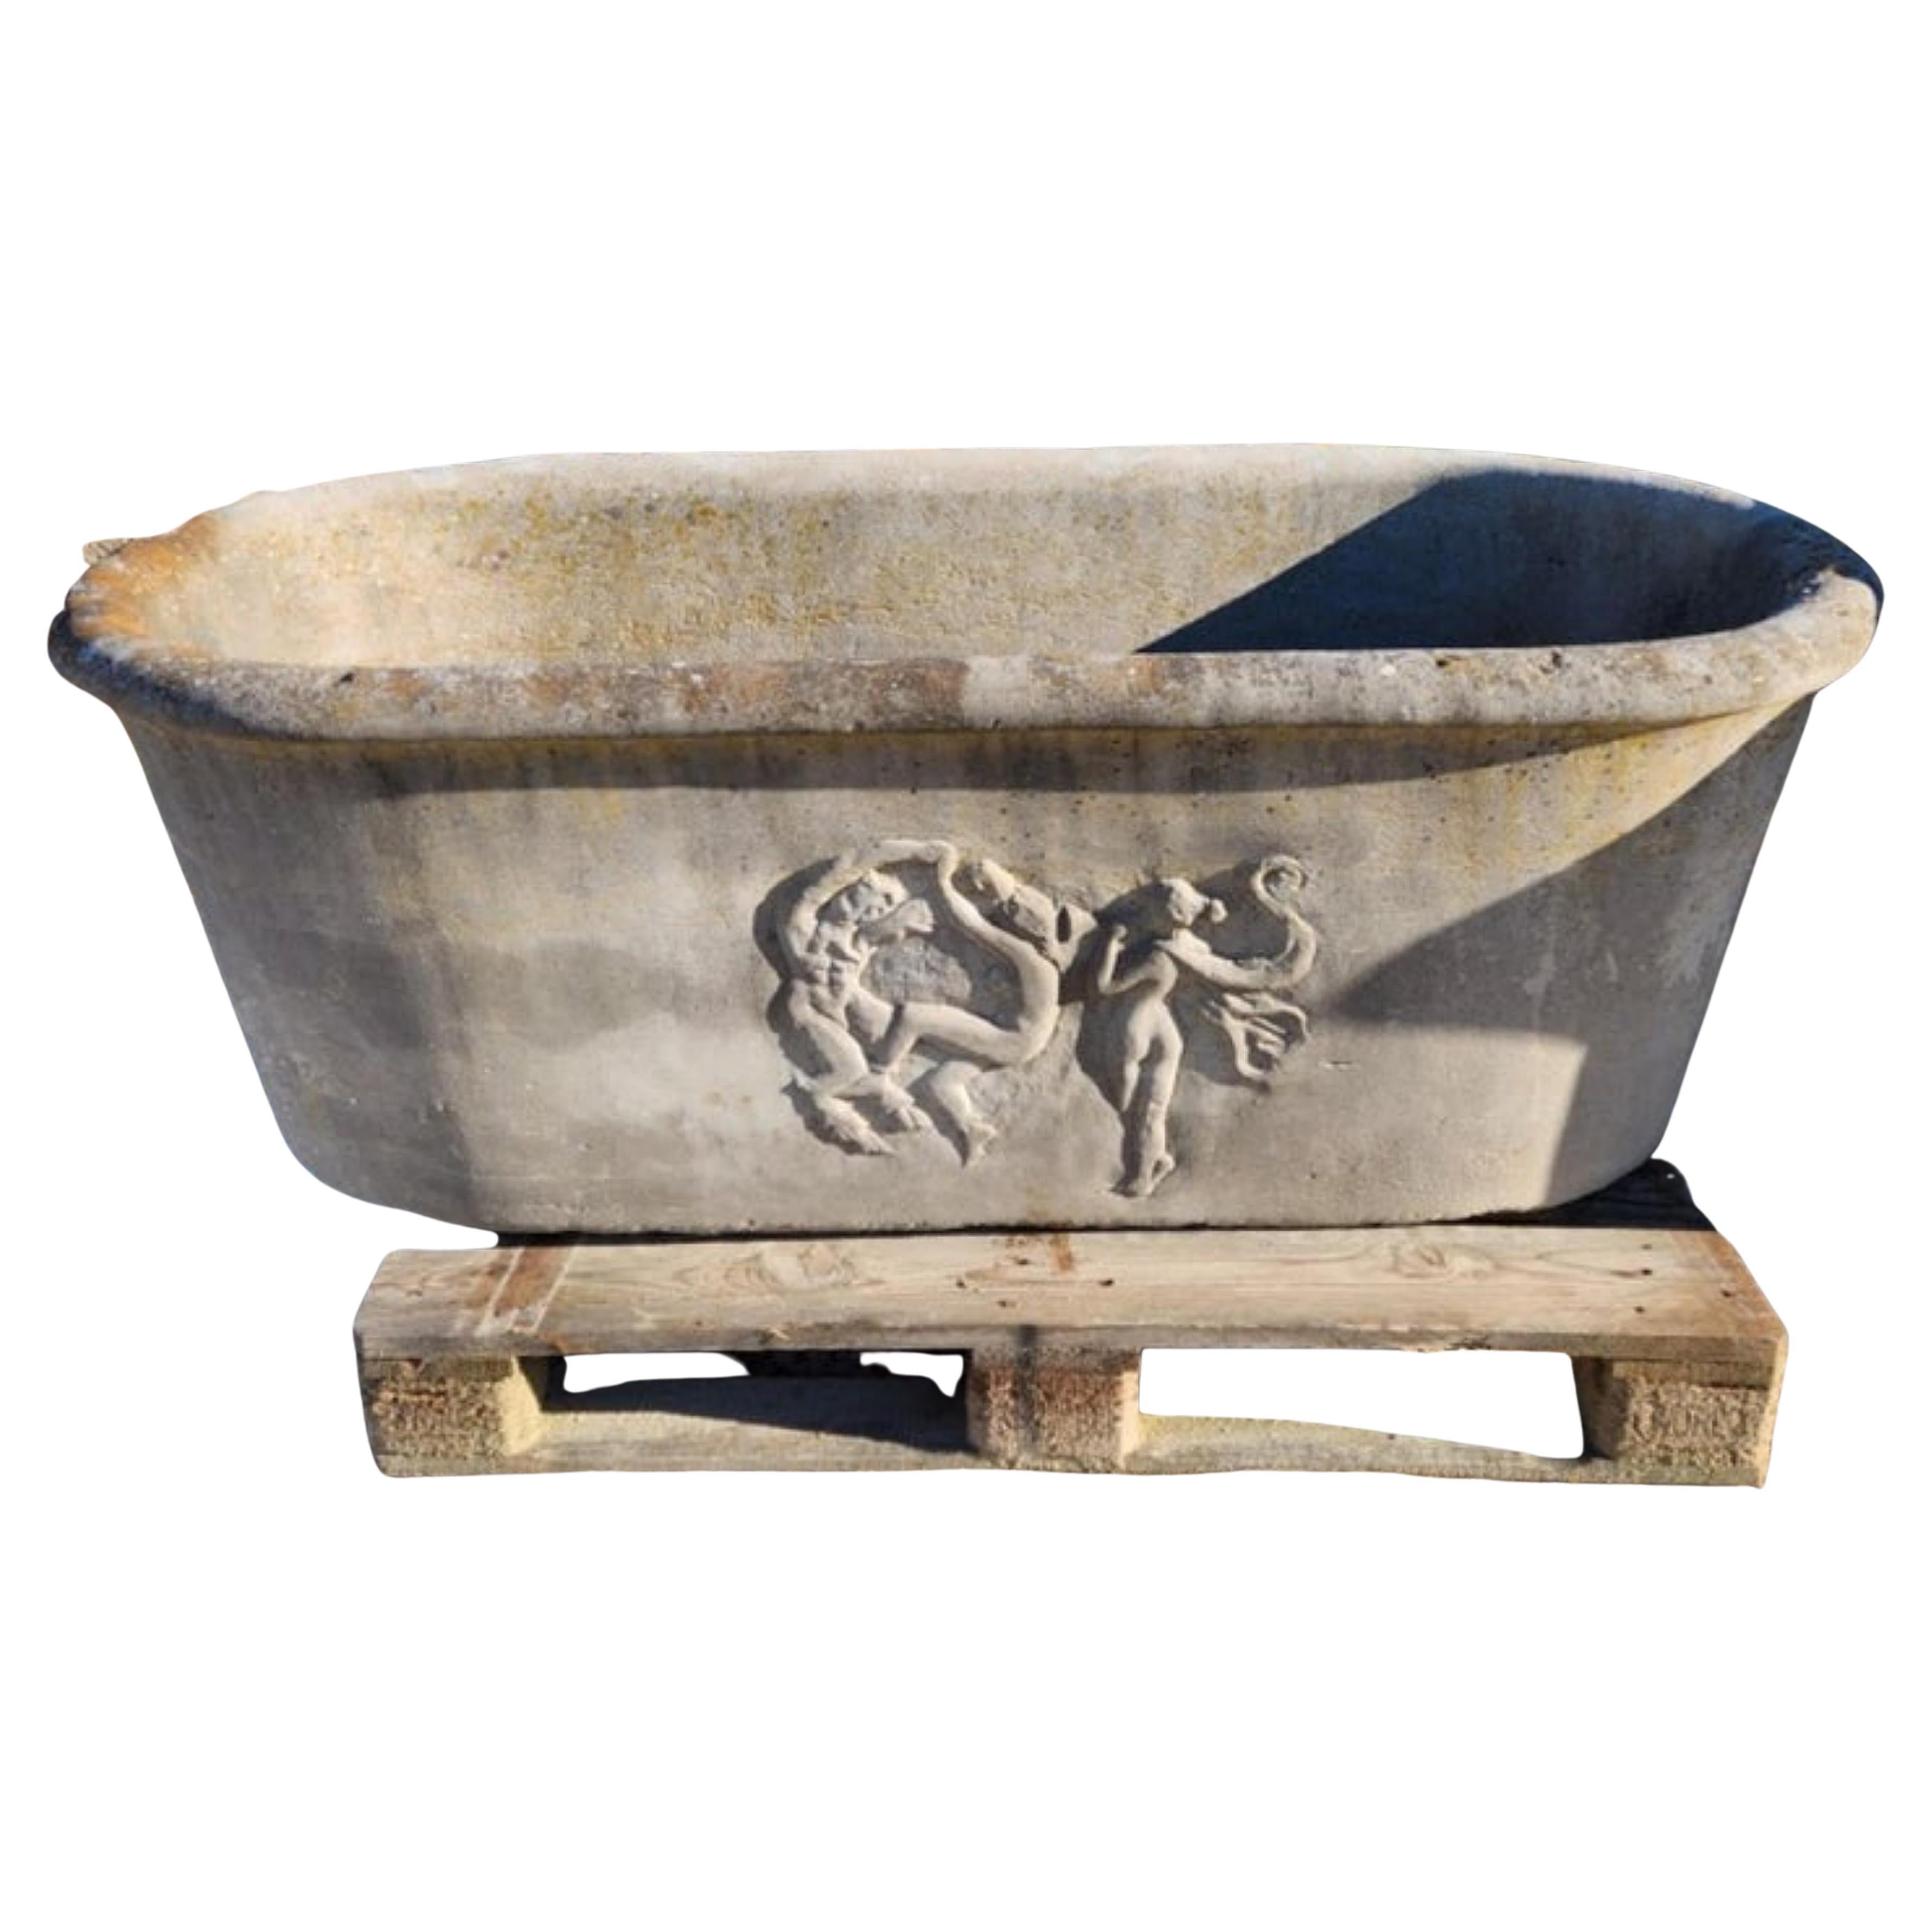 19th century ITALIAN RINGED DOUBLE SIDED STONE TUB

WIDTH 74cms
LENGTH 160 cms
DEPTH 62cm
WEIGHT 300Kg
MANUFACTURE Italian
Material Limestone
THICKNESS OF THE BASIN 54 cm.